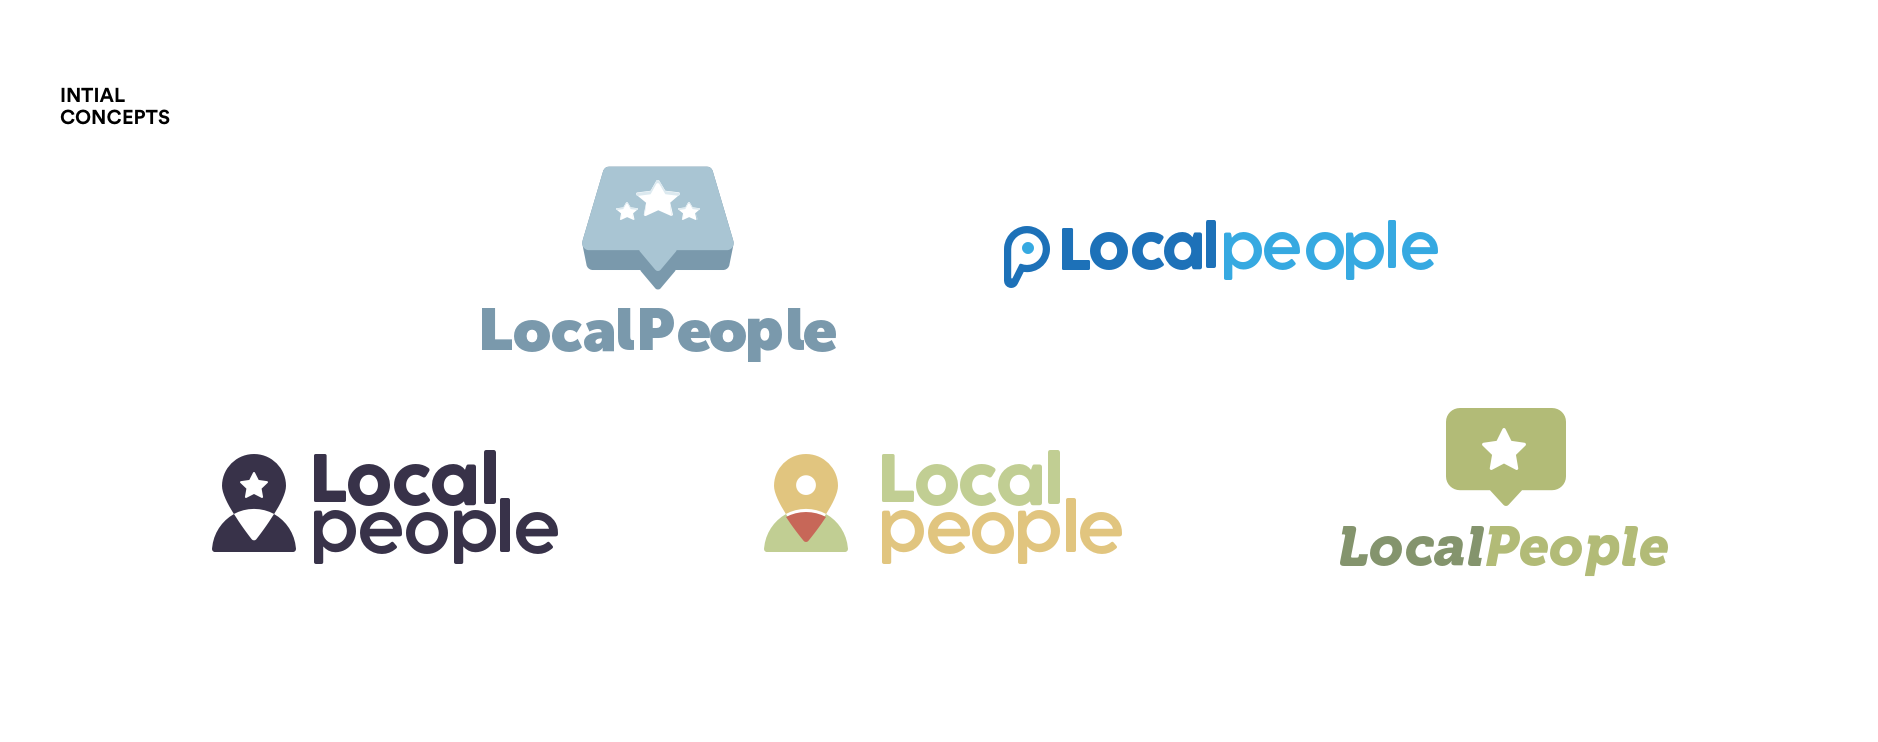 LOCAL-PEOPLE-BRAND-CONCEPTS